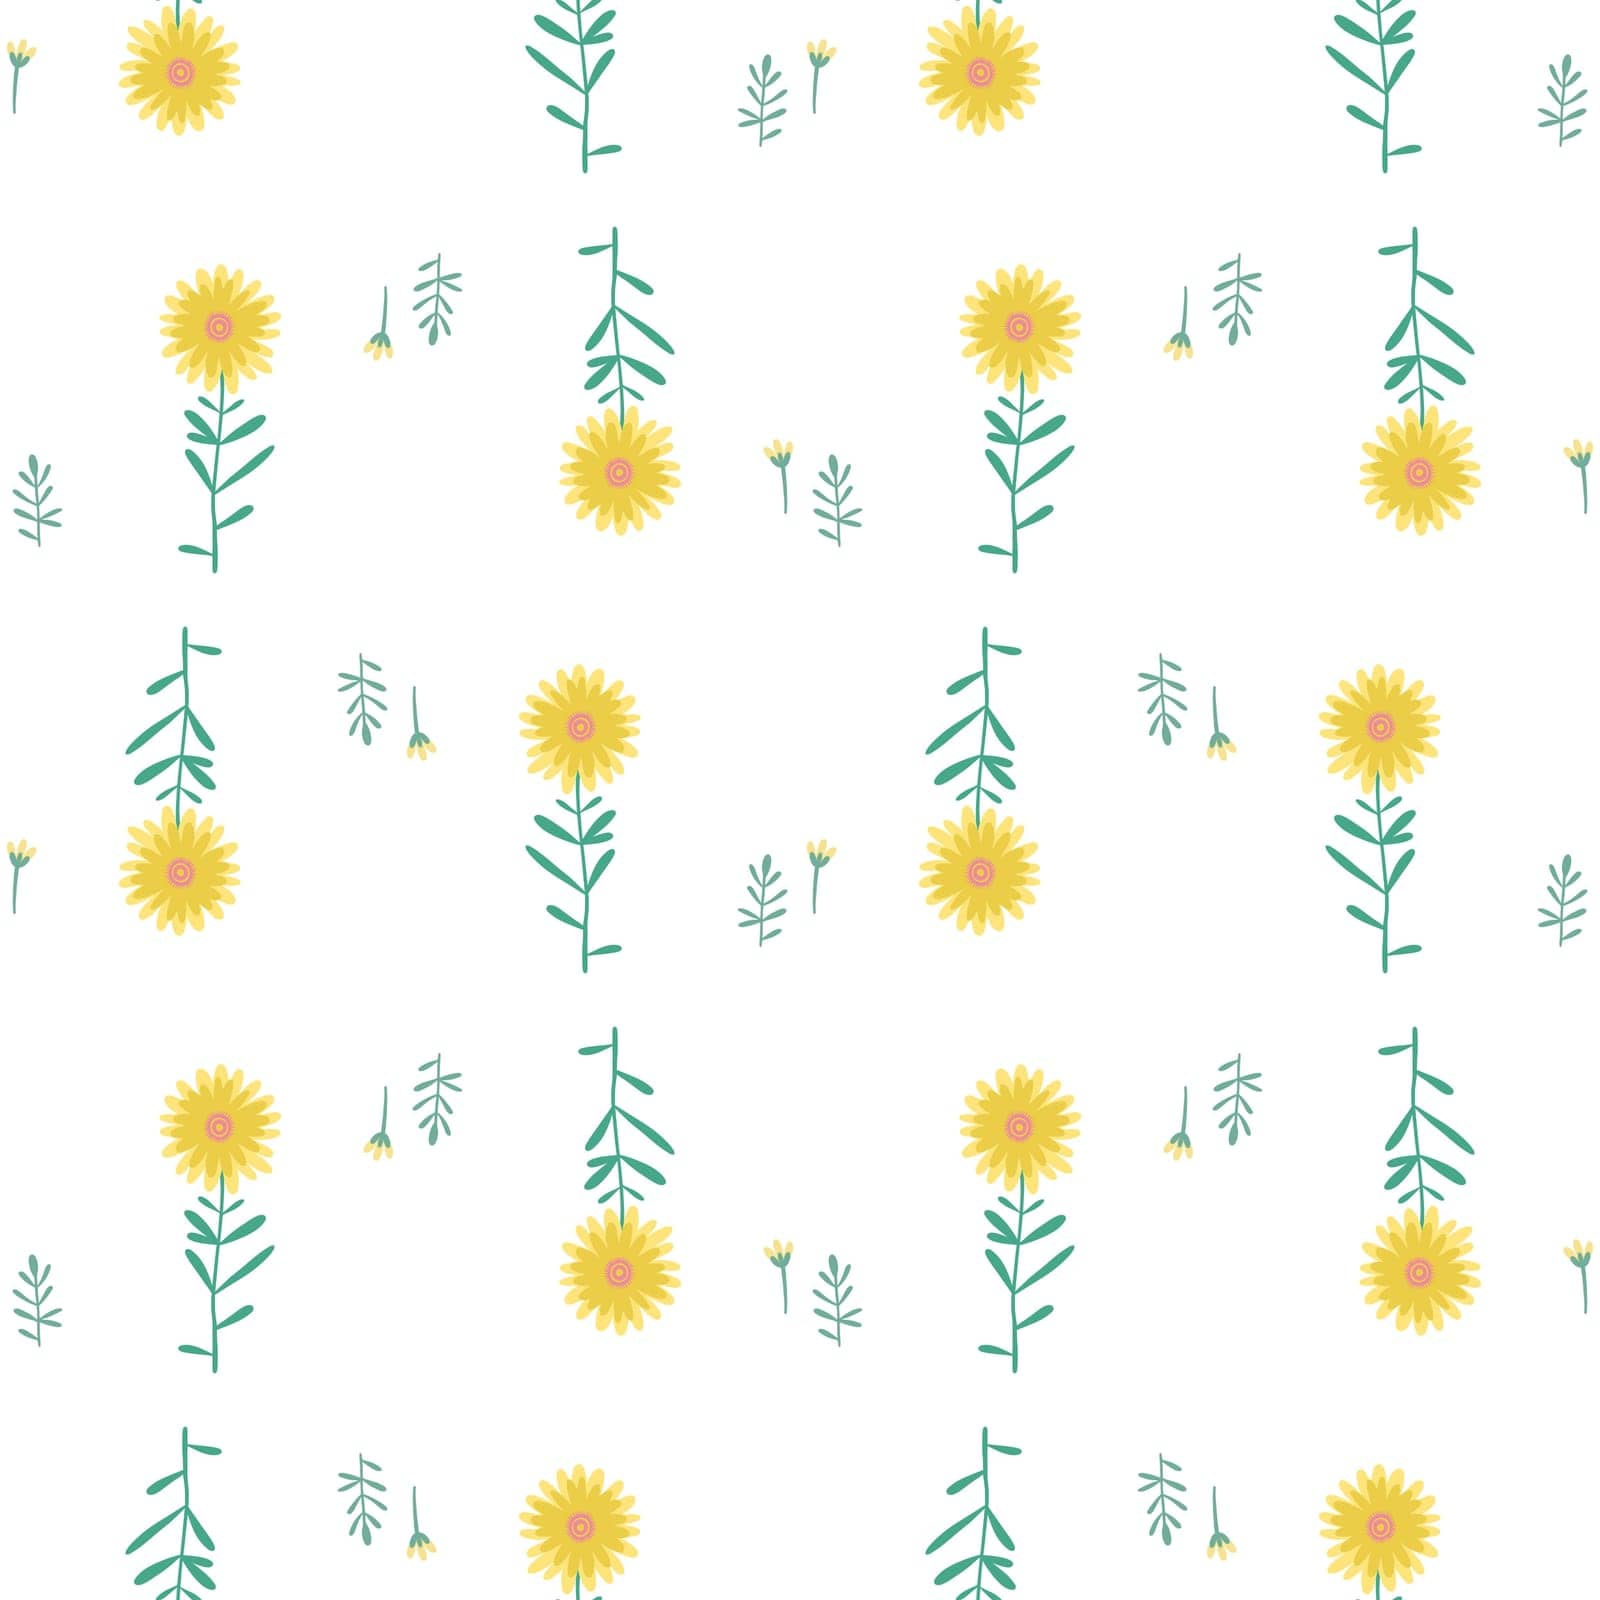 Floral Seamless Pattern of Sparse Yellow Flowers on White. Wallpaper Design for Textiles, Fabrics, Decorations, Papers Prints, Fashion Backgrounds, Wrappings Packaging.